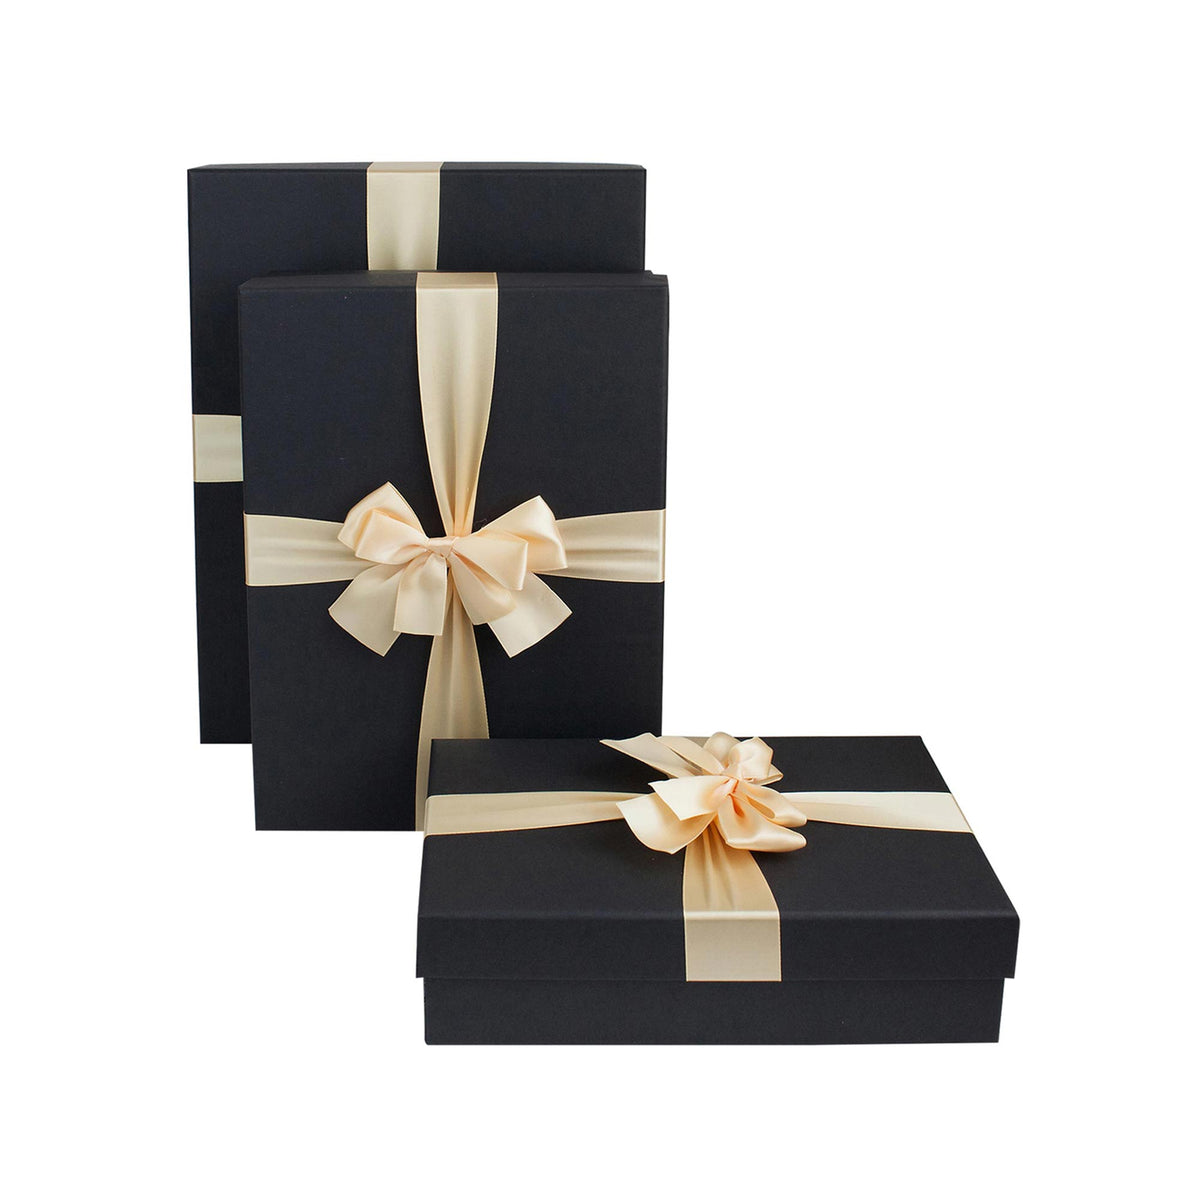 Set of 3 Black Gift Boxes with Cream Satin Ribbon (Sizes Available)